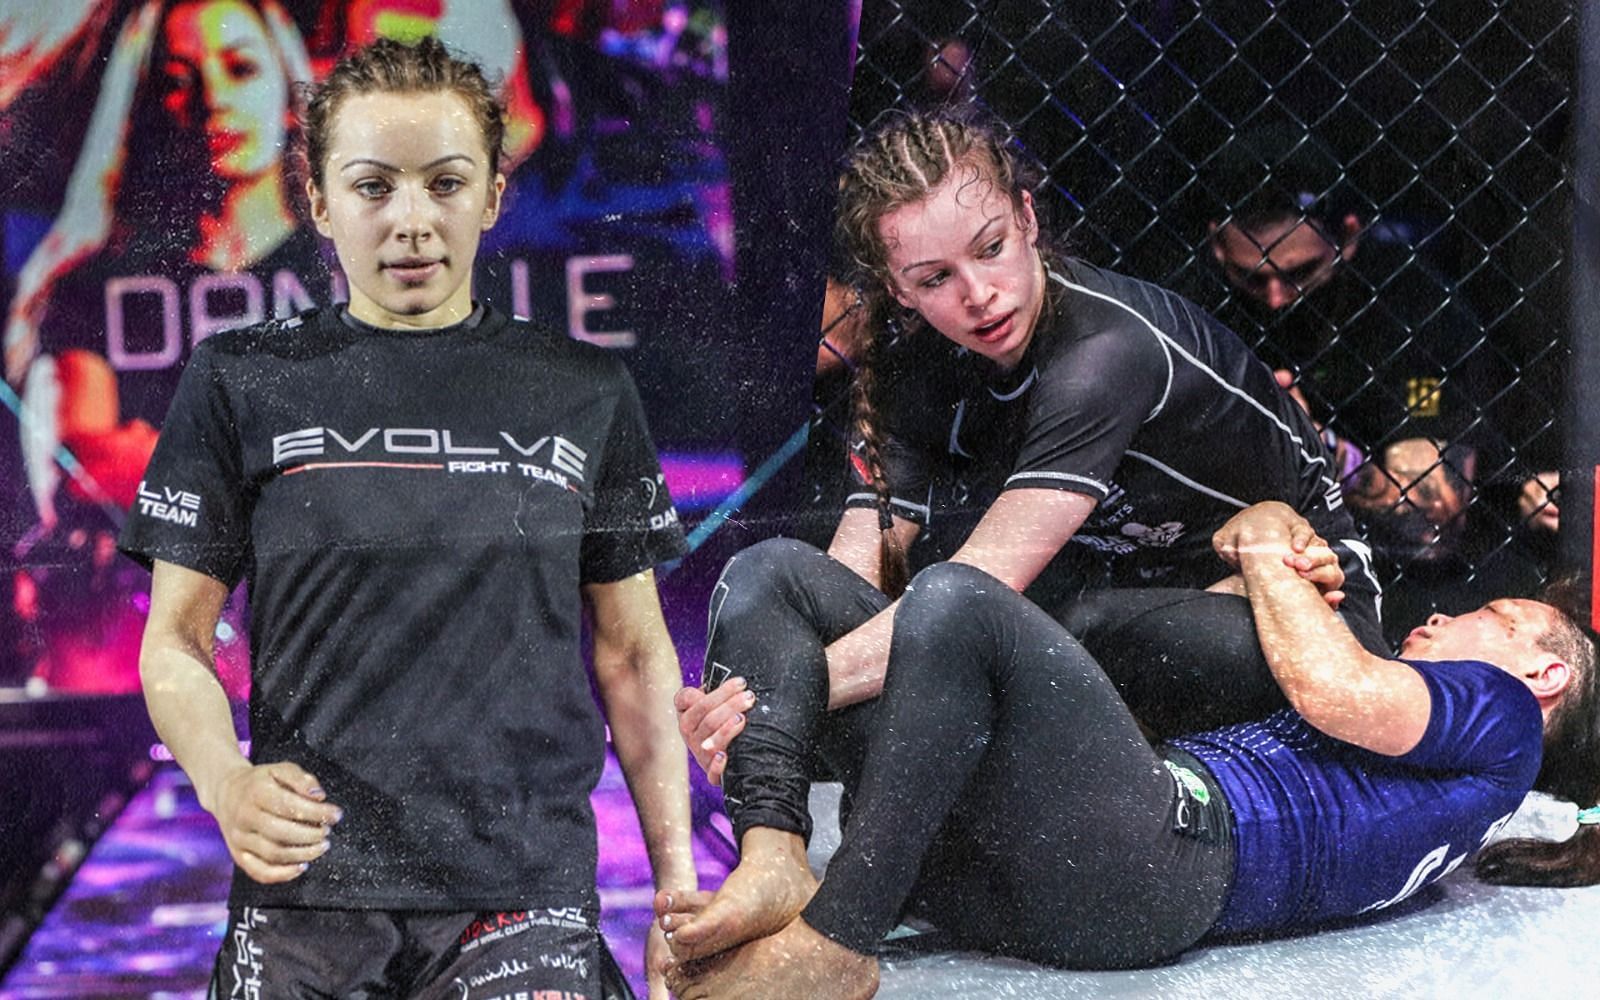 BJJ star Danielle Kelly opens up on being bullied [Credit: ONE Chapionship]